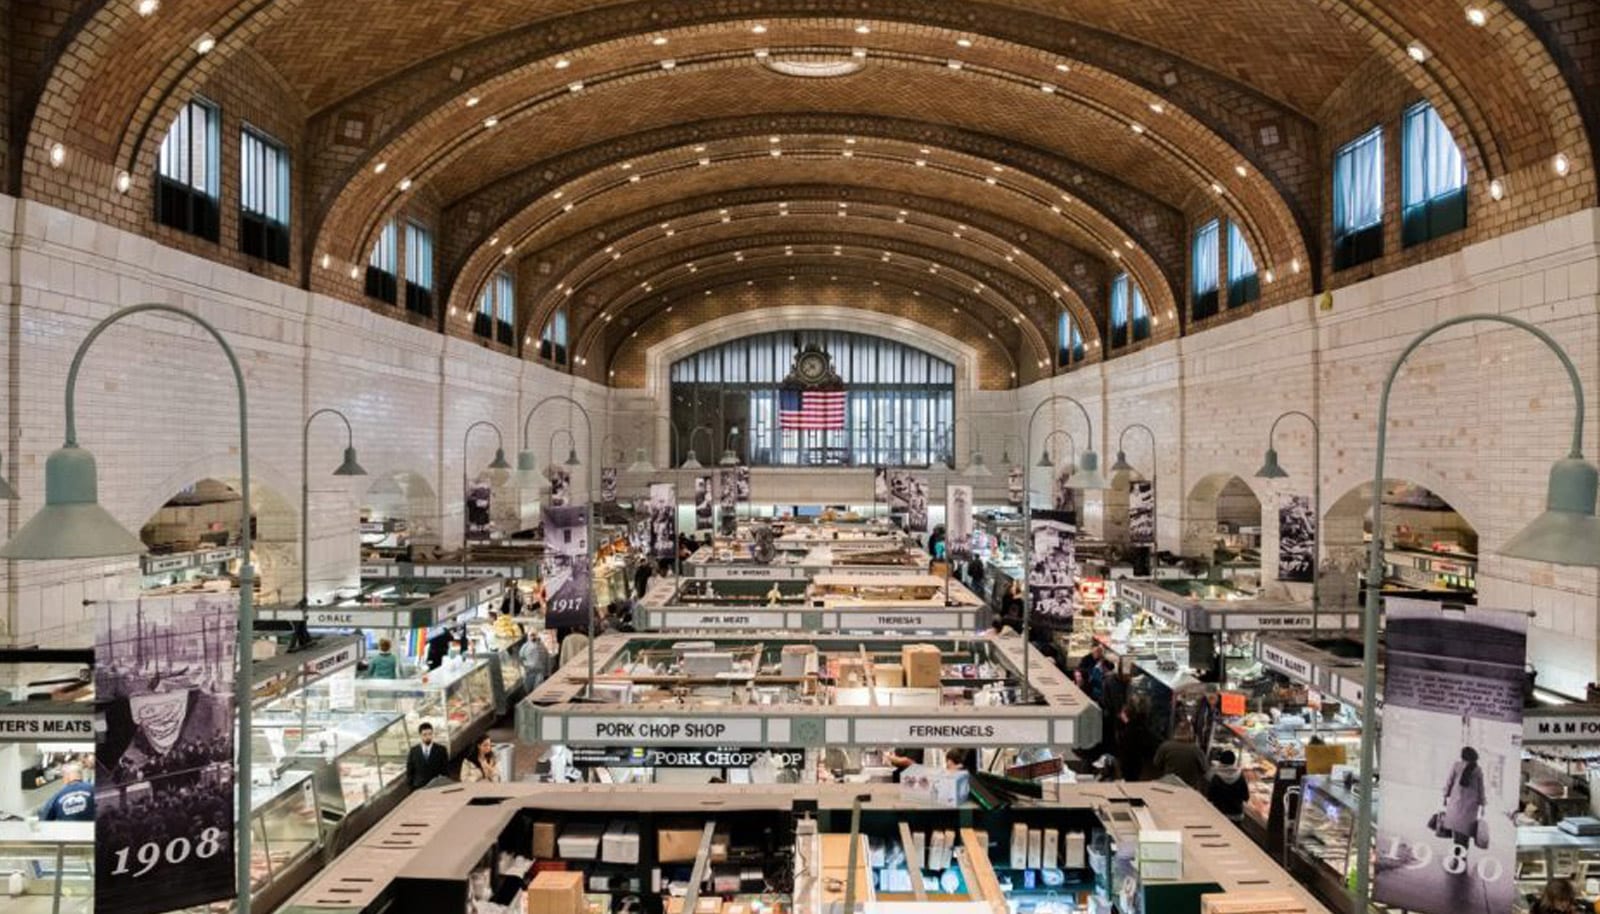 large indoor marketplace with historic architectural structures